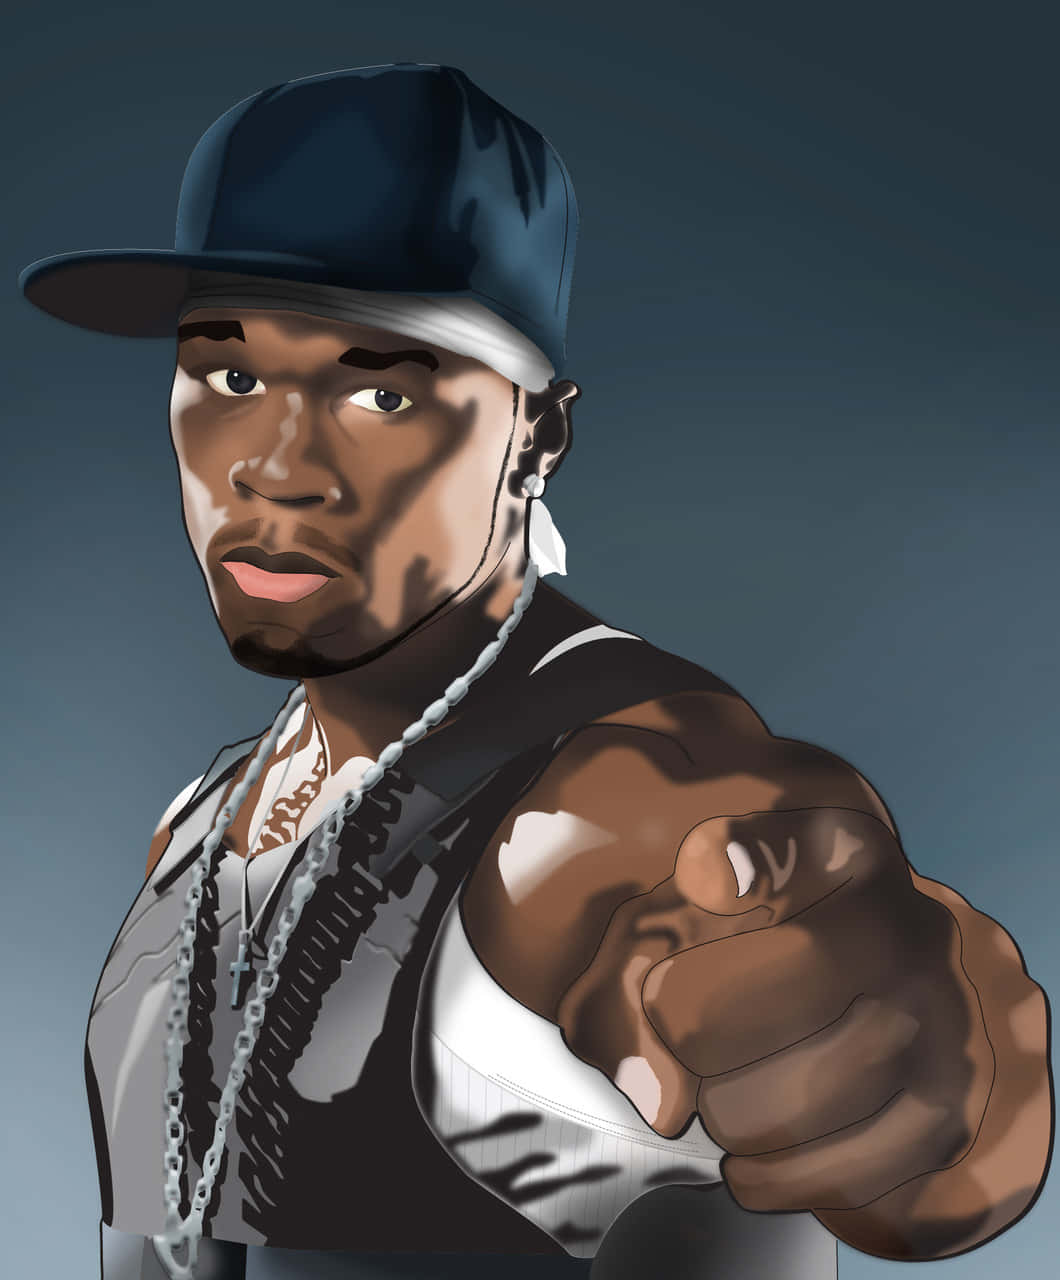 Download 50 Cent Pictures 1060 x 1280 